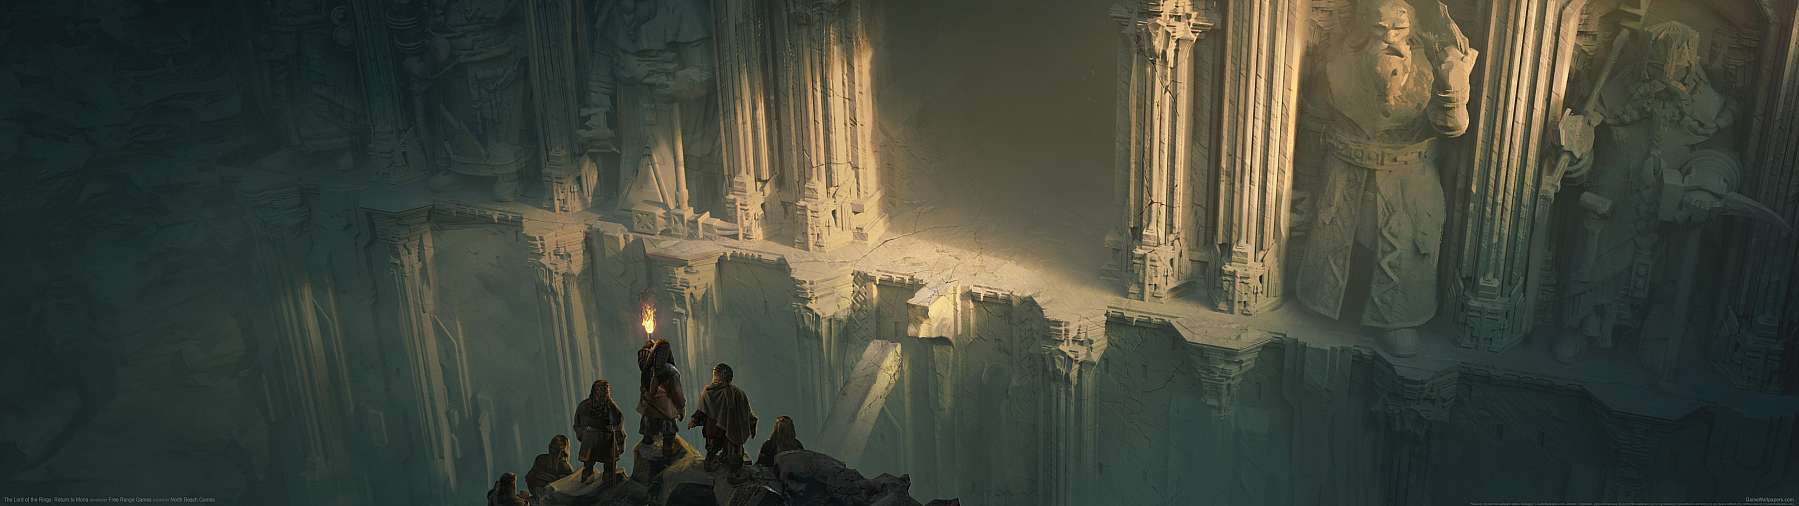 The Lord of the Rings: Return to Moria achtergrond